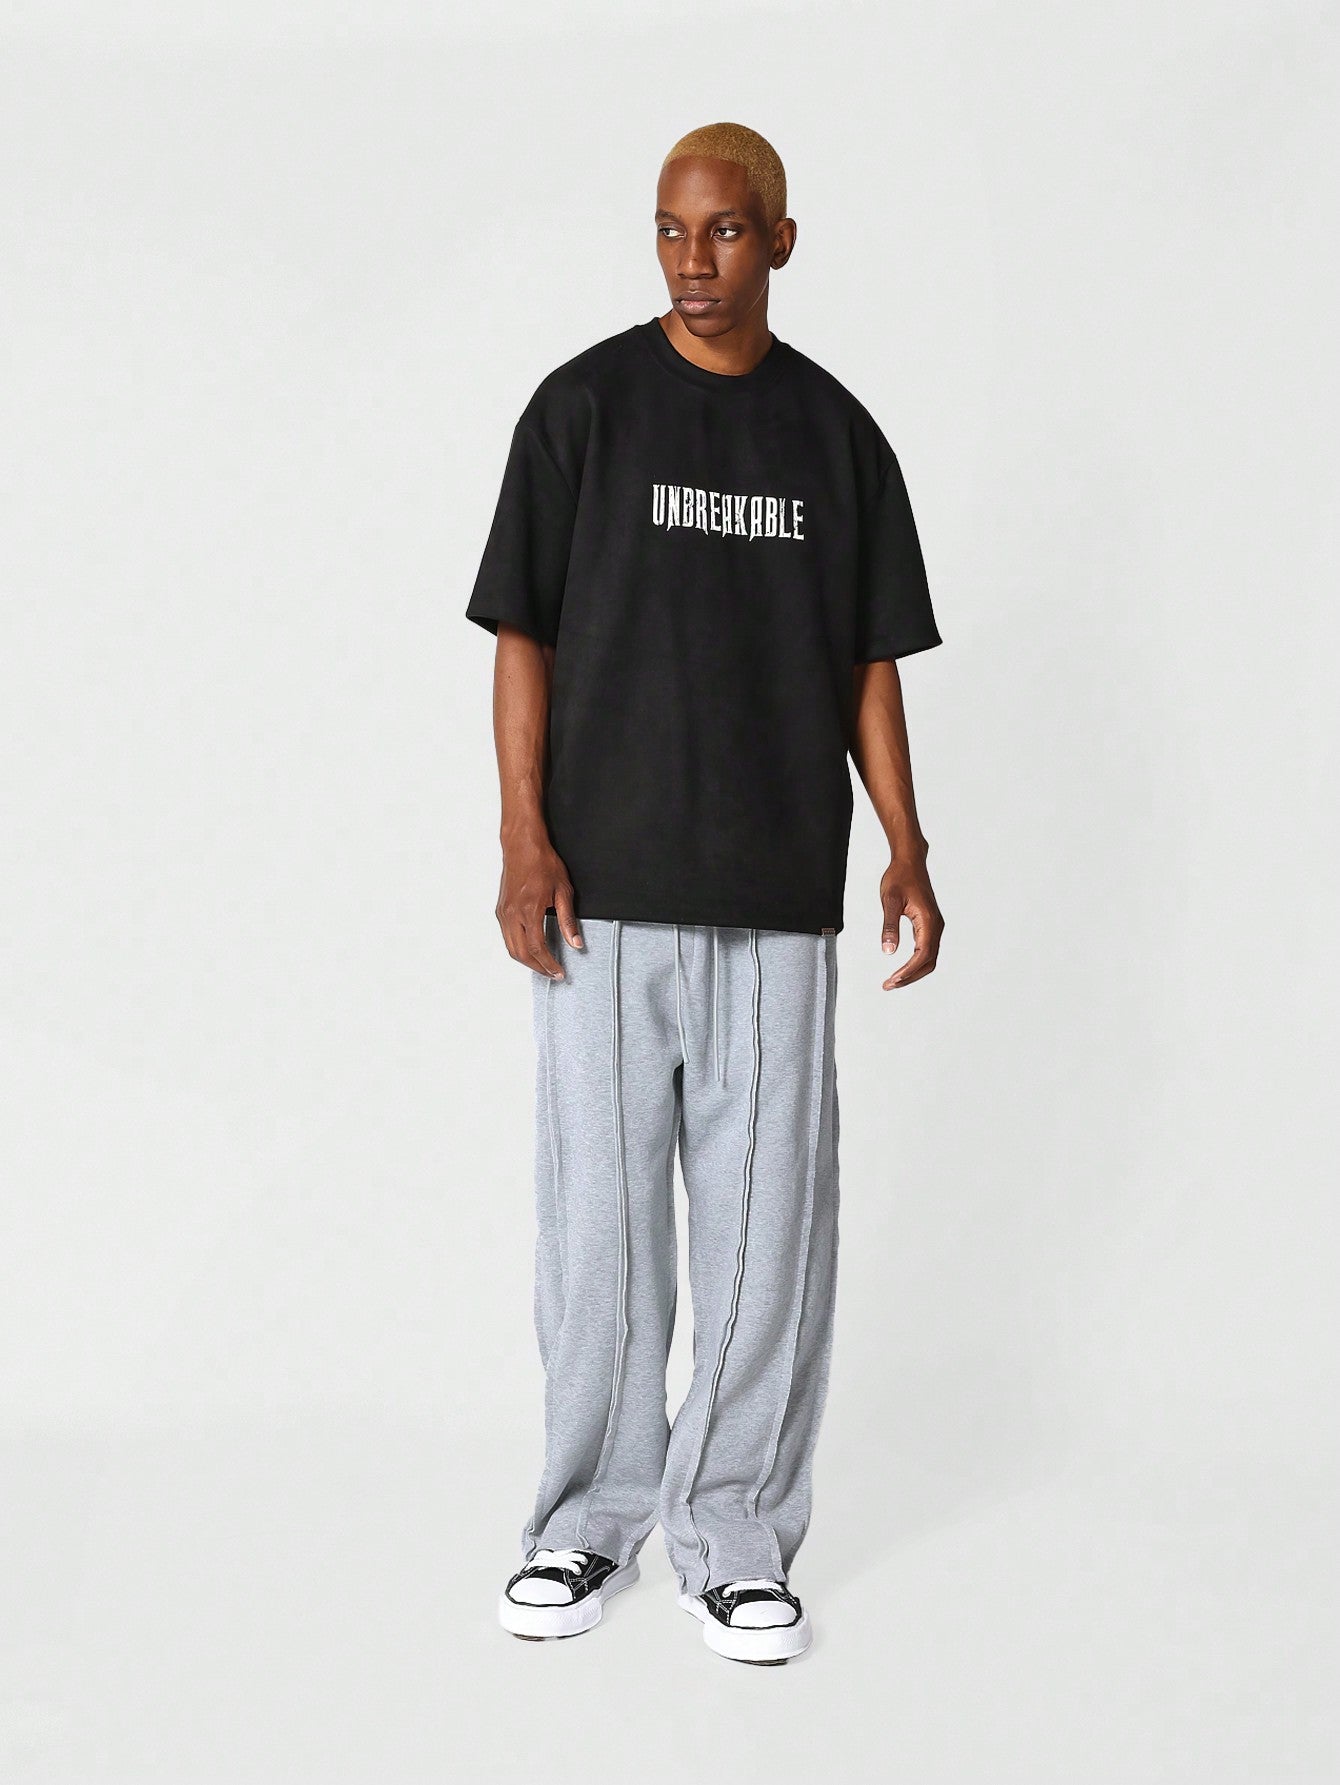 Drop Crotch Jogger With Exposed Seam College Ready